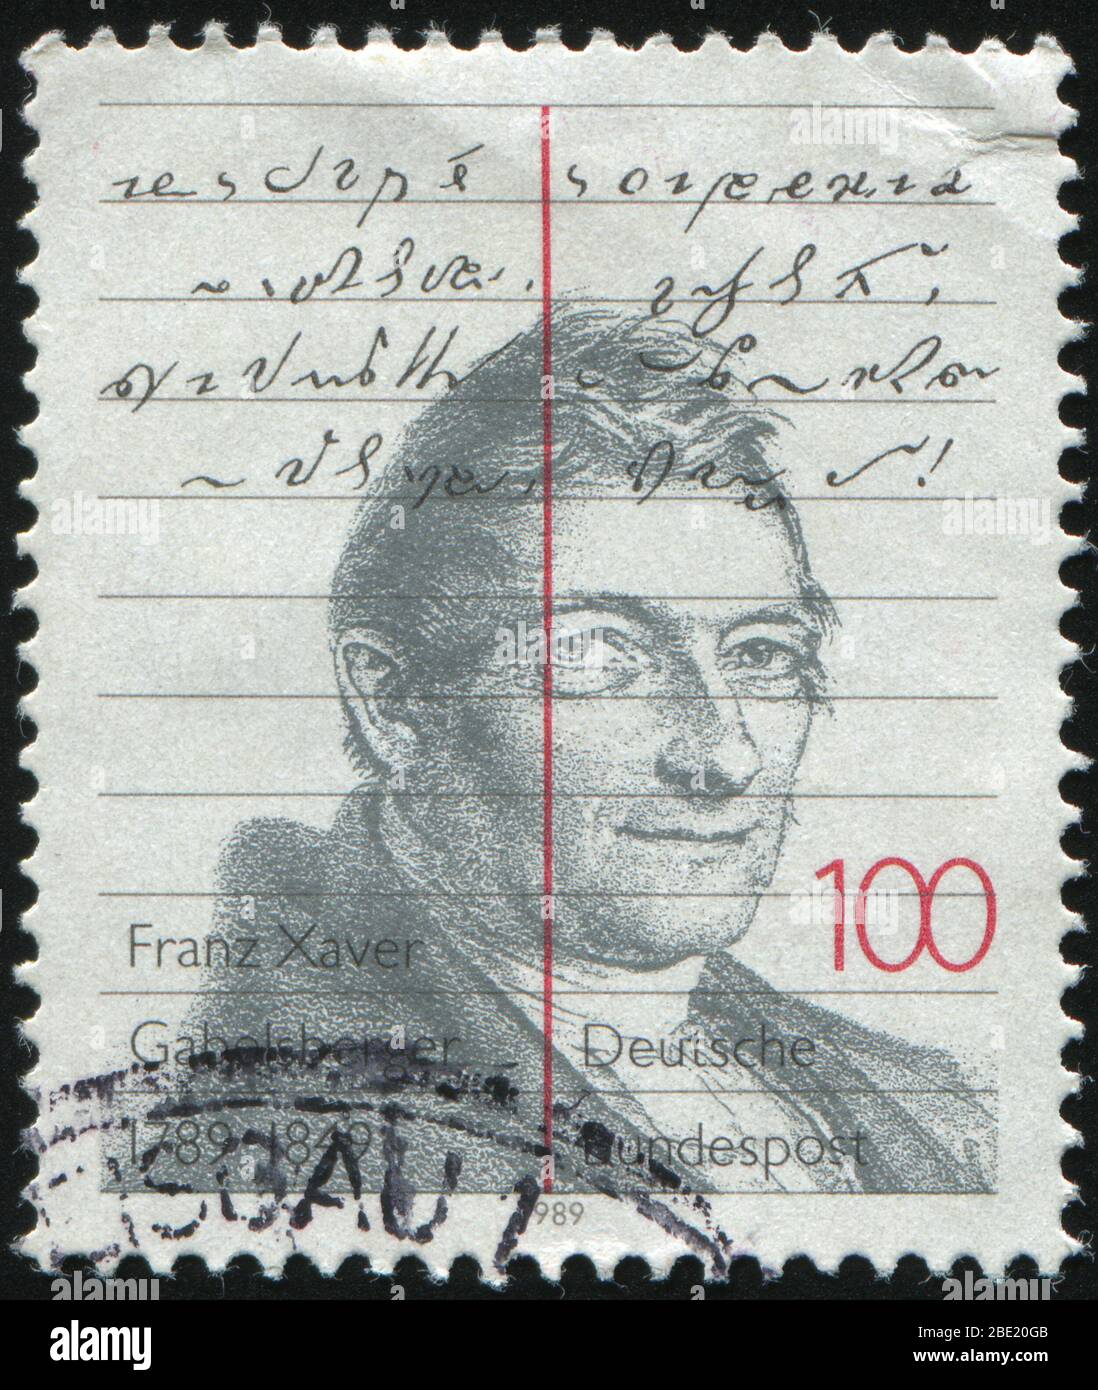 GERMANY- CIRCA 1980: stamp printed by Germany, shows Franz Xaver Gabelsberger Inventor of a German Shorthand, circa 1980. Stock Photo